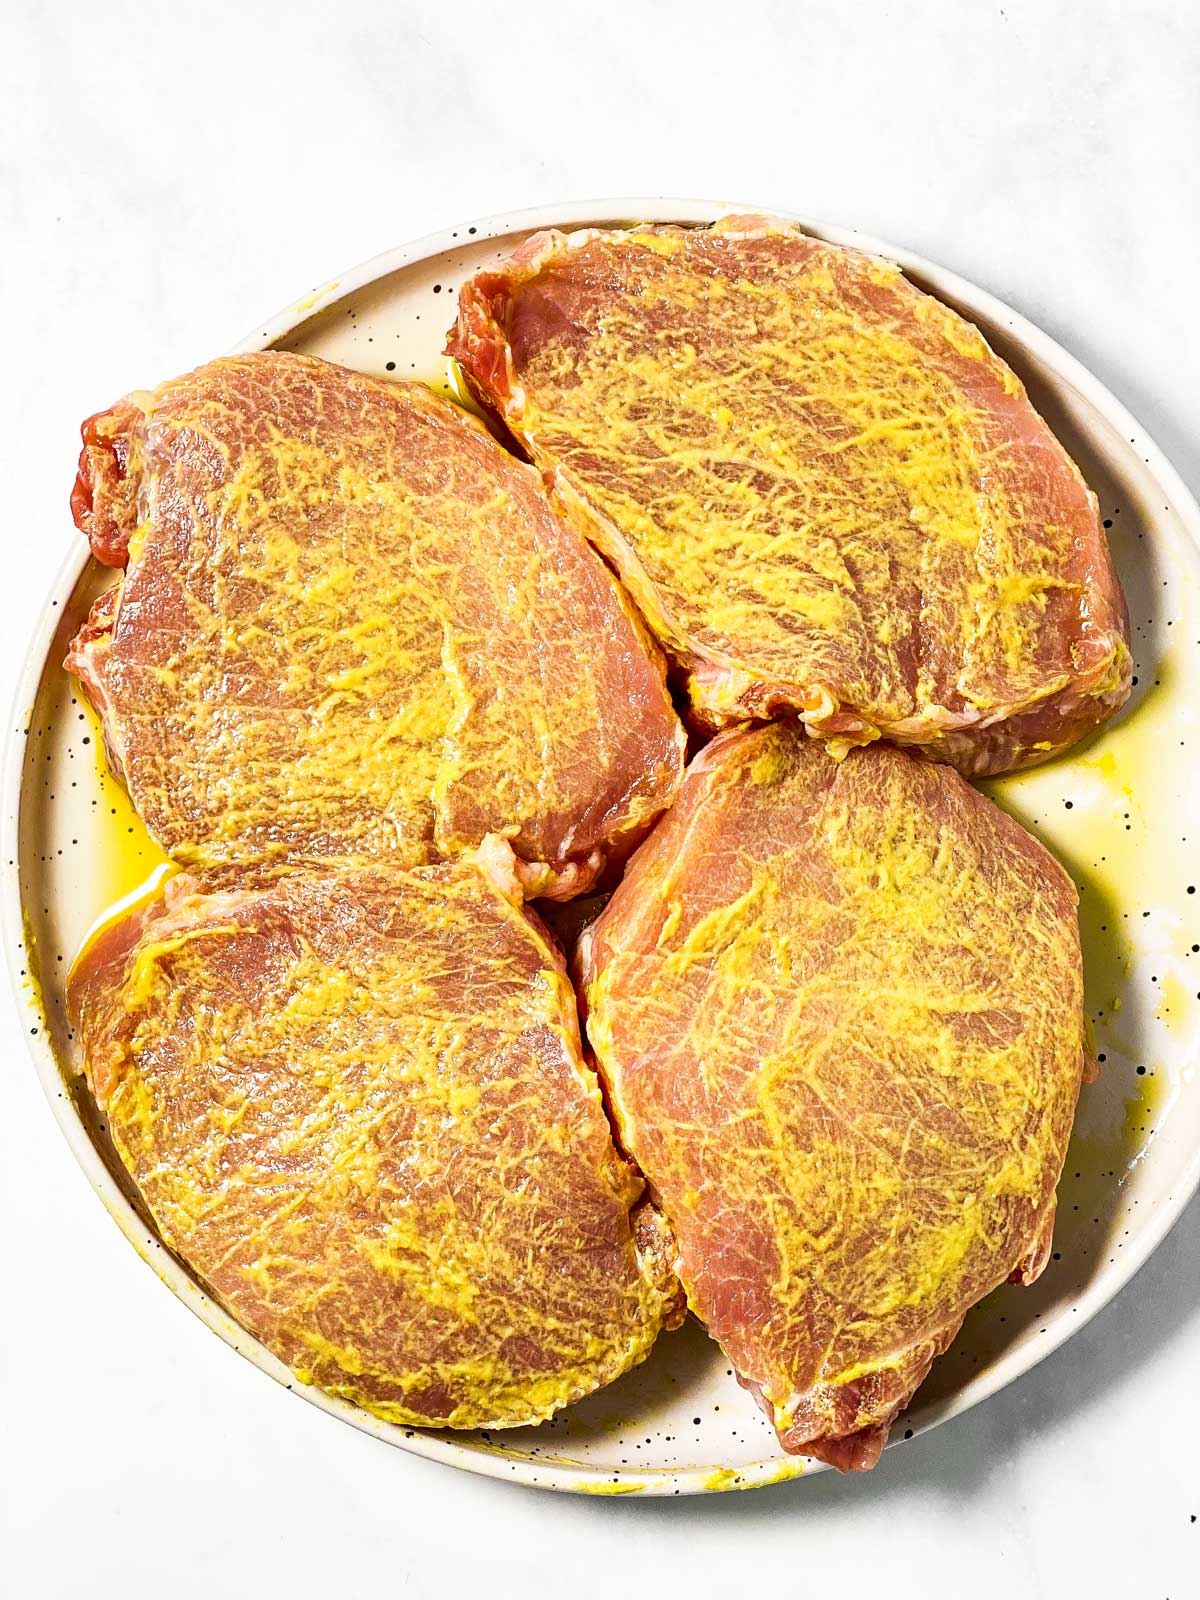 four pork chops covered in mustard on white plate